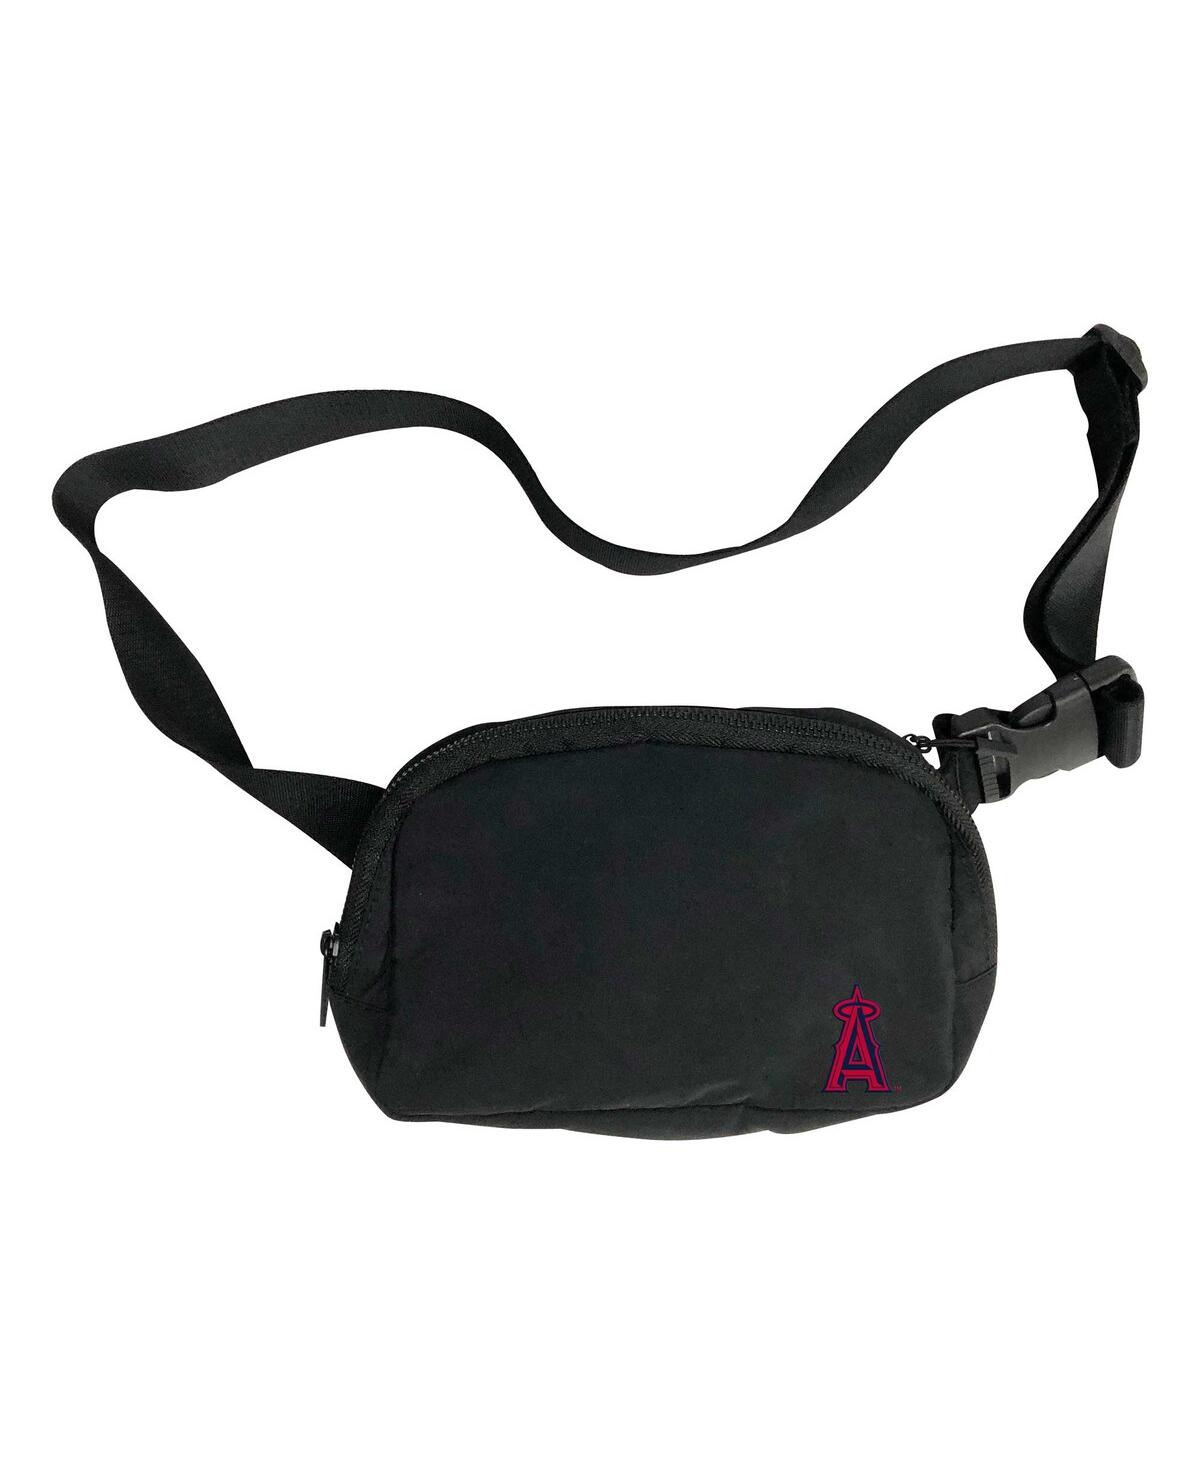 Men's and Women's Los Angeles Angels Fanny Pack - Black